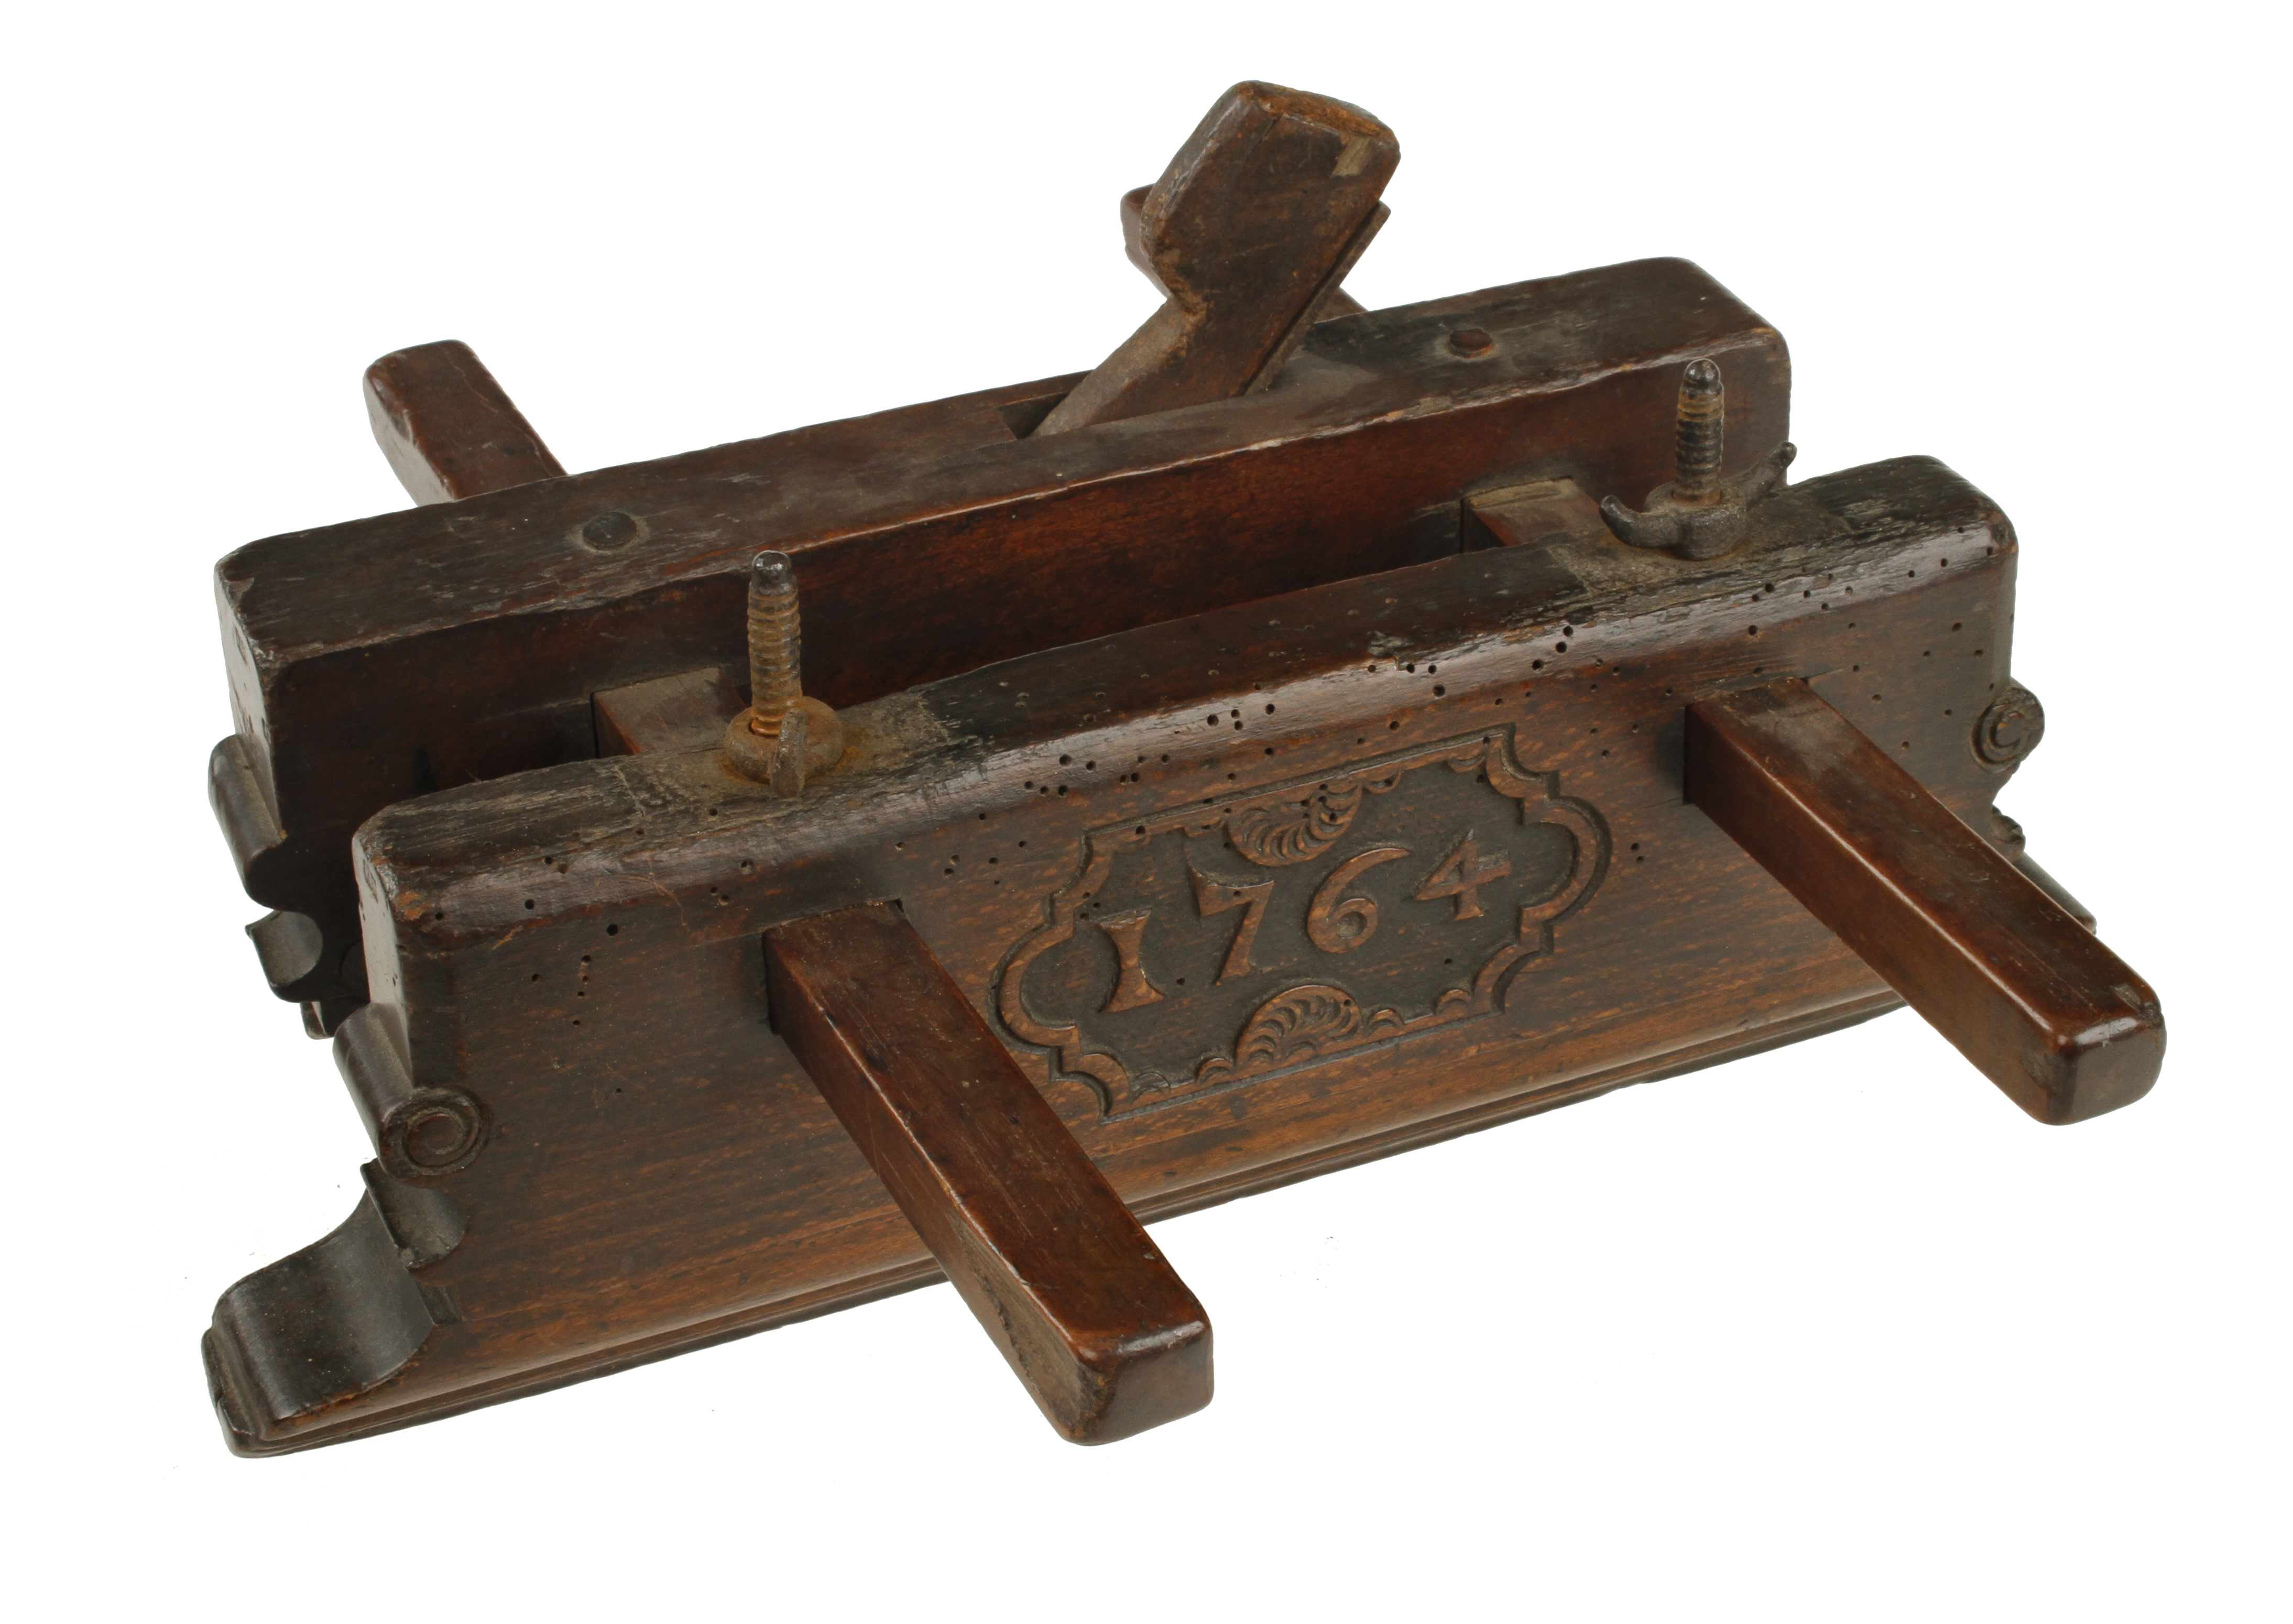 An 18c dated Dutch ploeg plough plane with makers mark of Frans Moret and dated 1764,